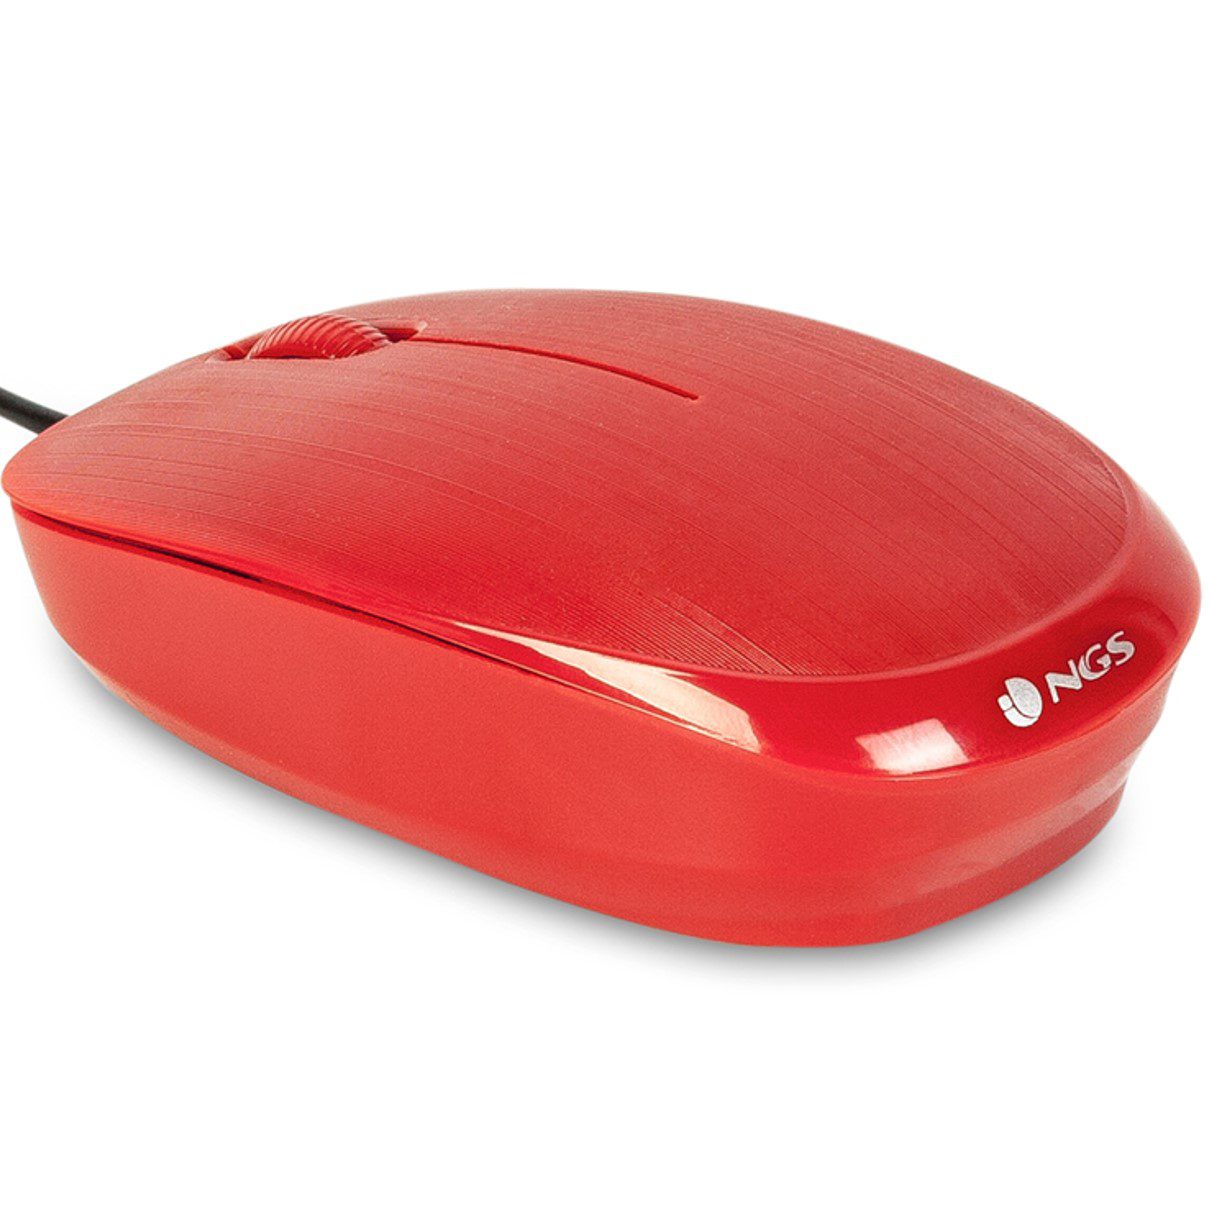 8435430606195-PN-Cod.-Articulo-FLAMERED-Raton-con-cable-ngs-flamered-optico-1000dpi-2-botones-scroll-ergonomico-usb-rojo-2